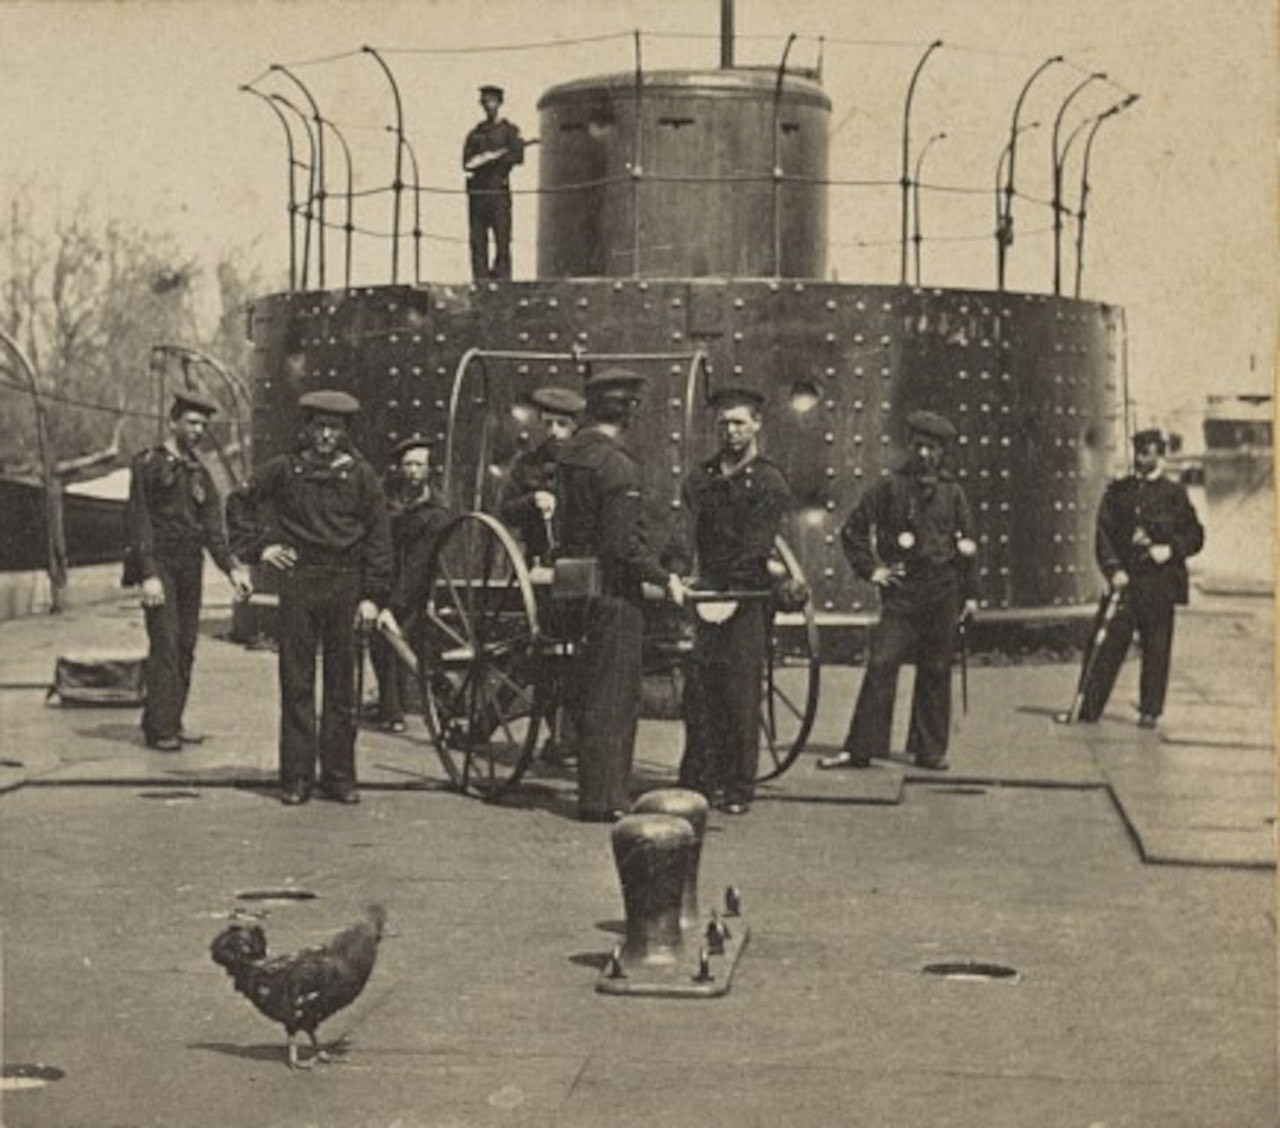 An old photo shows sailors standing in front of a turret on a ship.